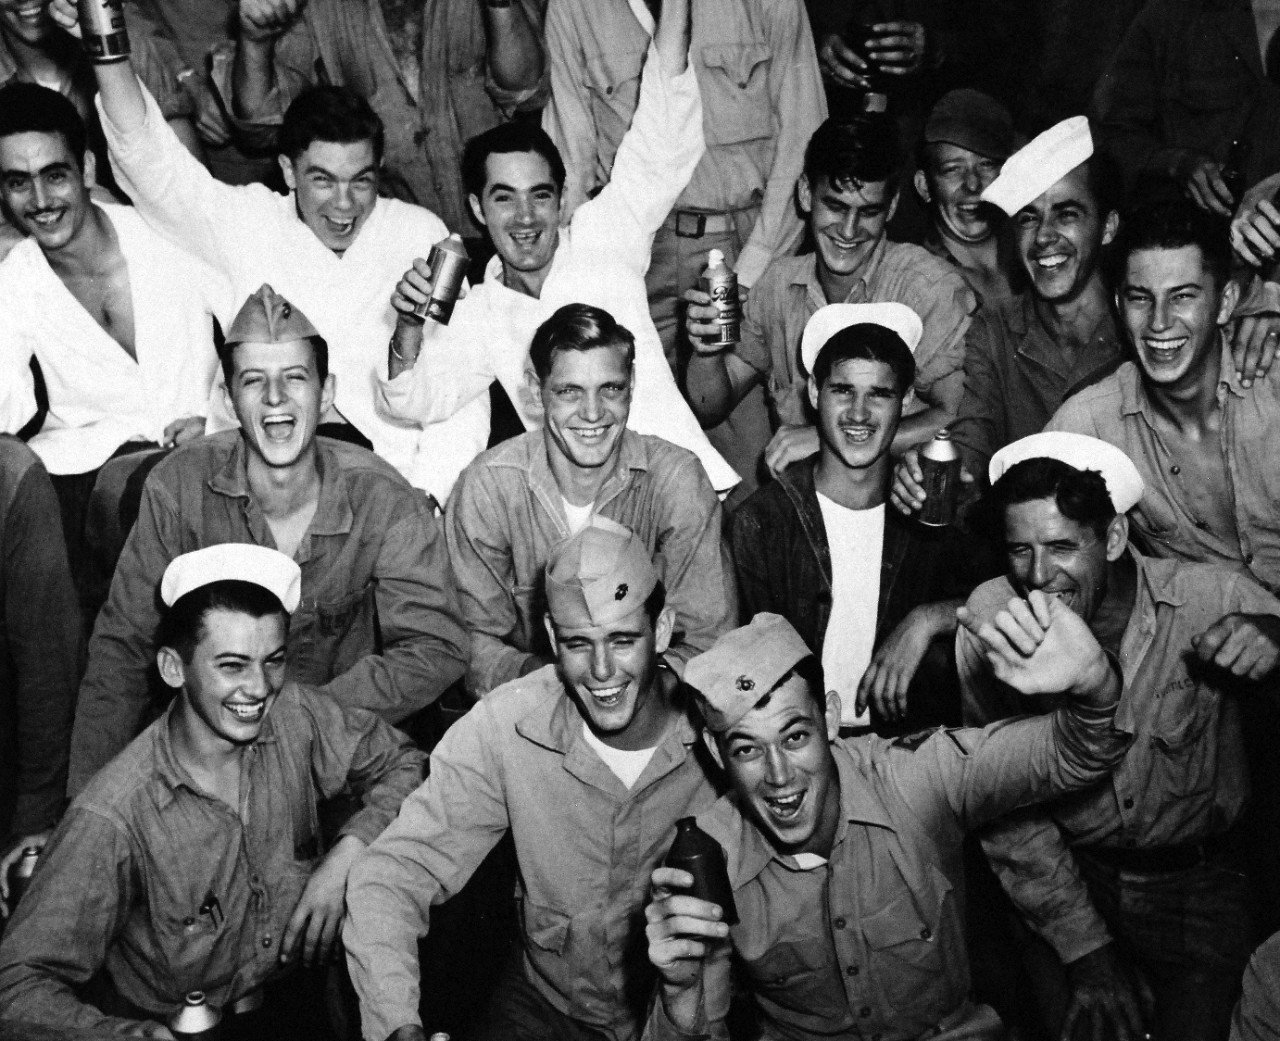 80-G-490305:  V-J Day, August 15, 1945.   Victory Celebrations (V-J Day) at CINCPAC HQ, Guam, August 15, 1945.  Official U.S. Navy photograph, now in the collections of the National Archives.   (2015/11/10).